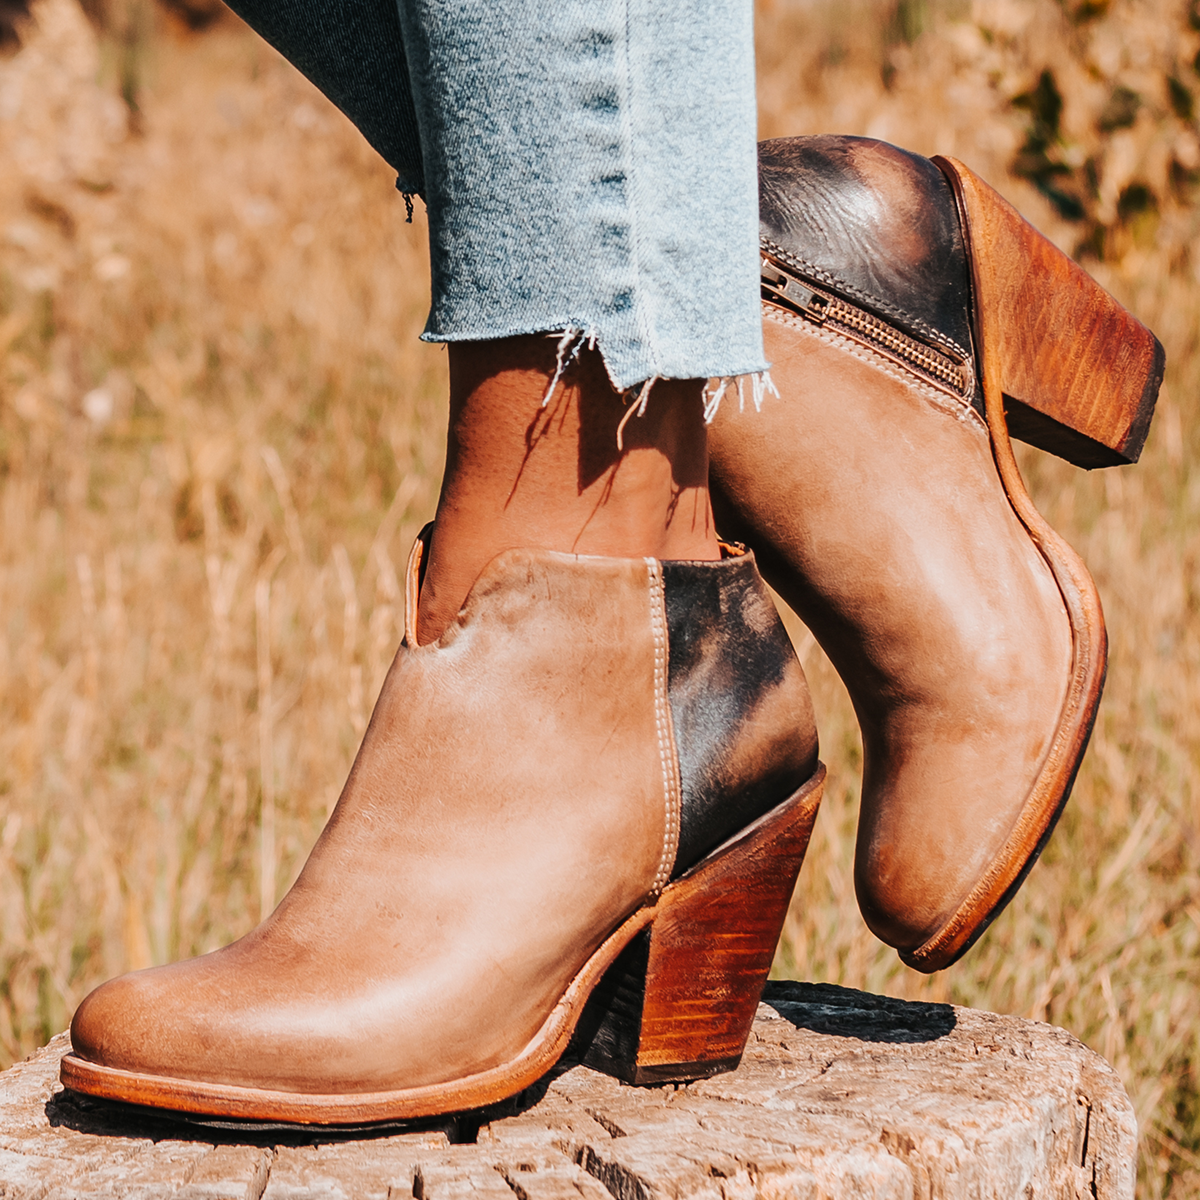 FREEBIRD women's Detroit taupe featuring inverted heel, front cut out dip, and two toned full grain leather